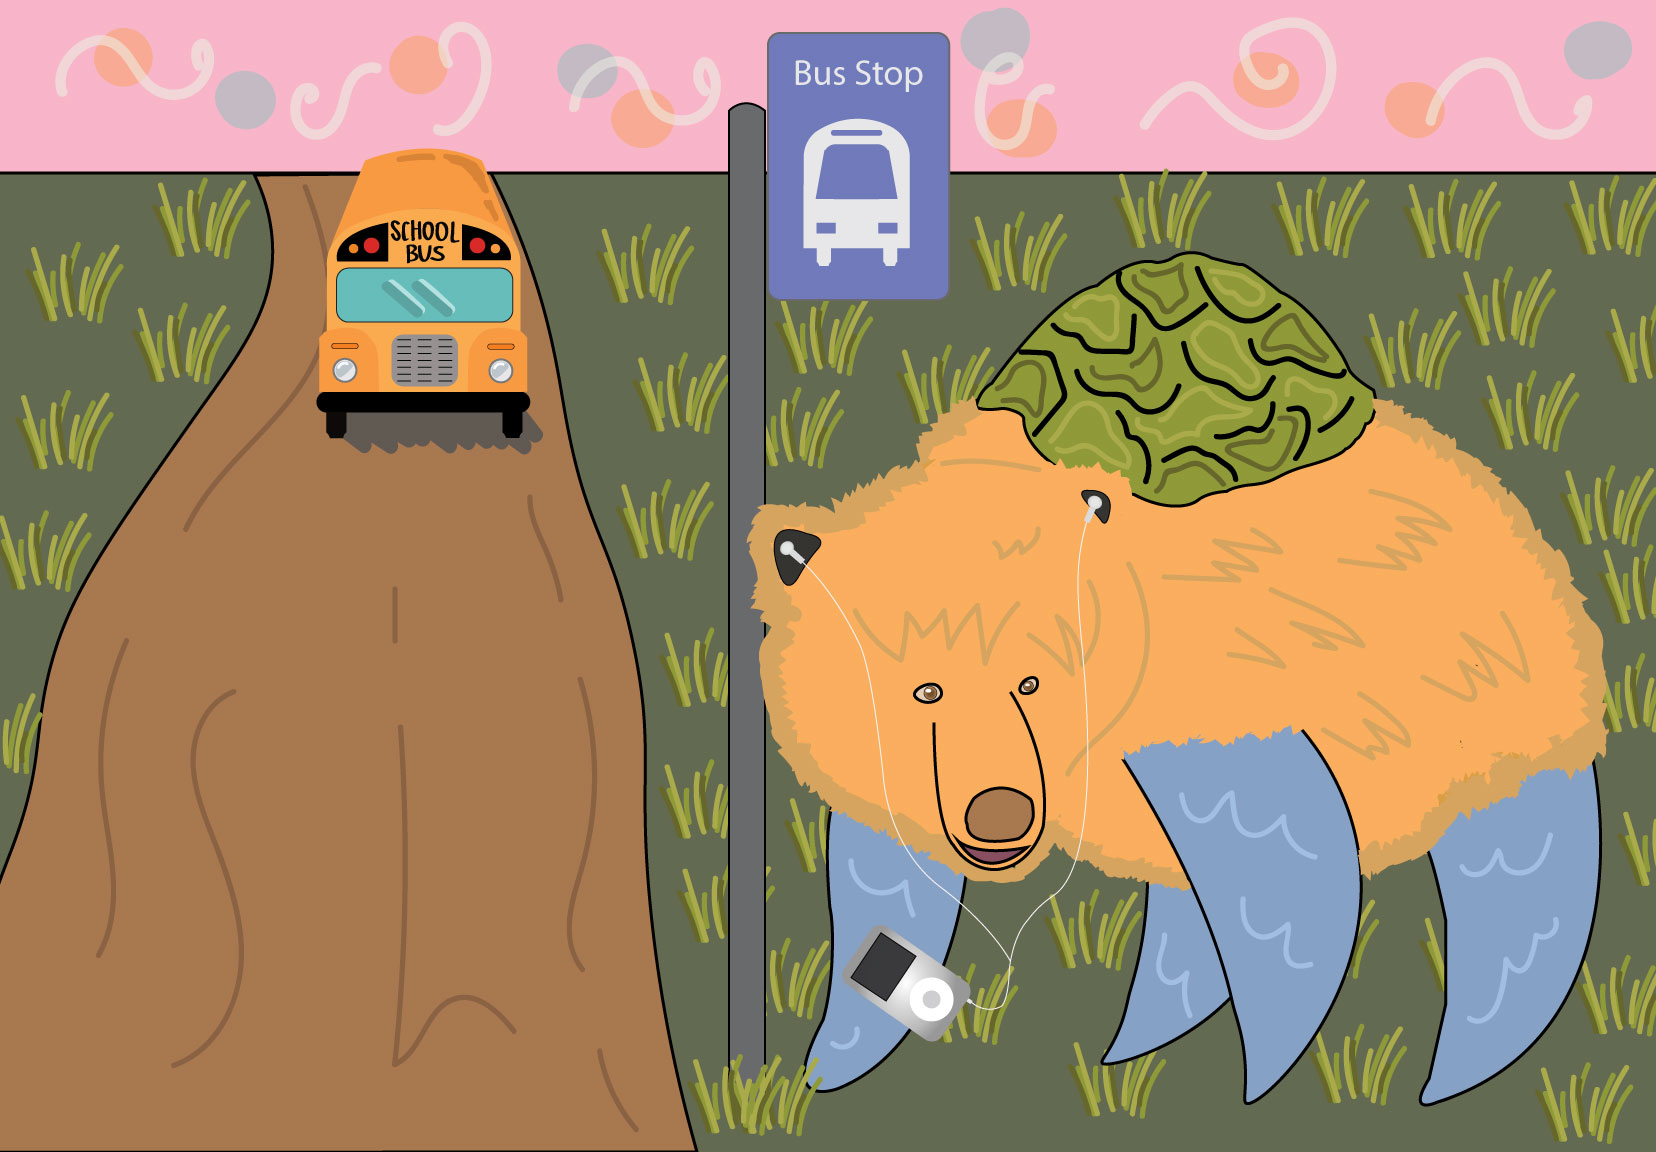 My character Lily as a bear with dolphin fins and a turtle shell, standing by the street as she waits for the bus.